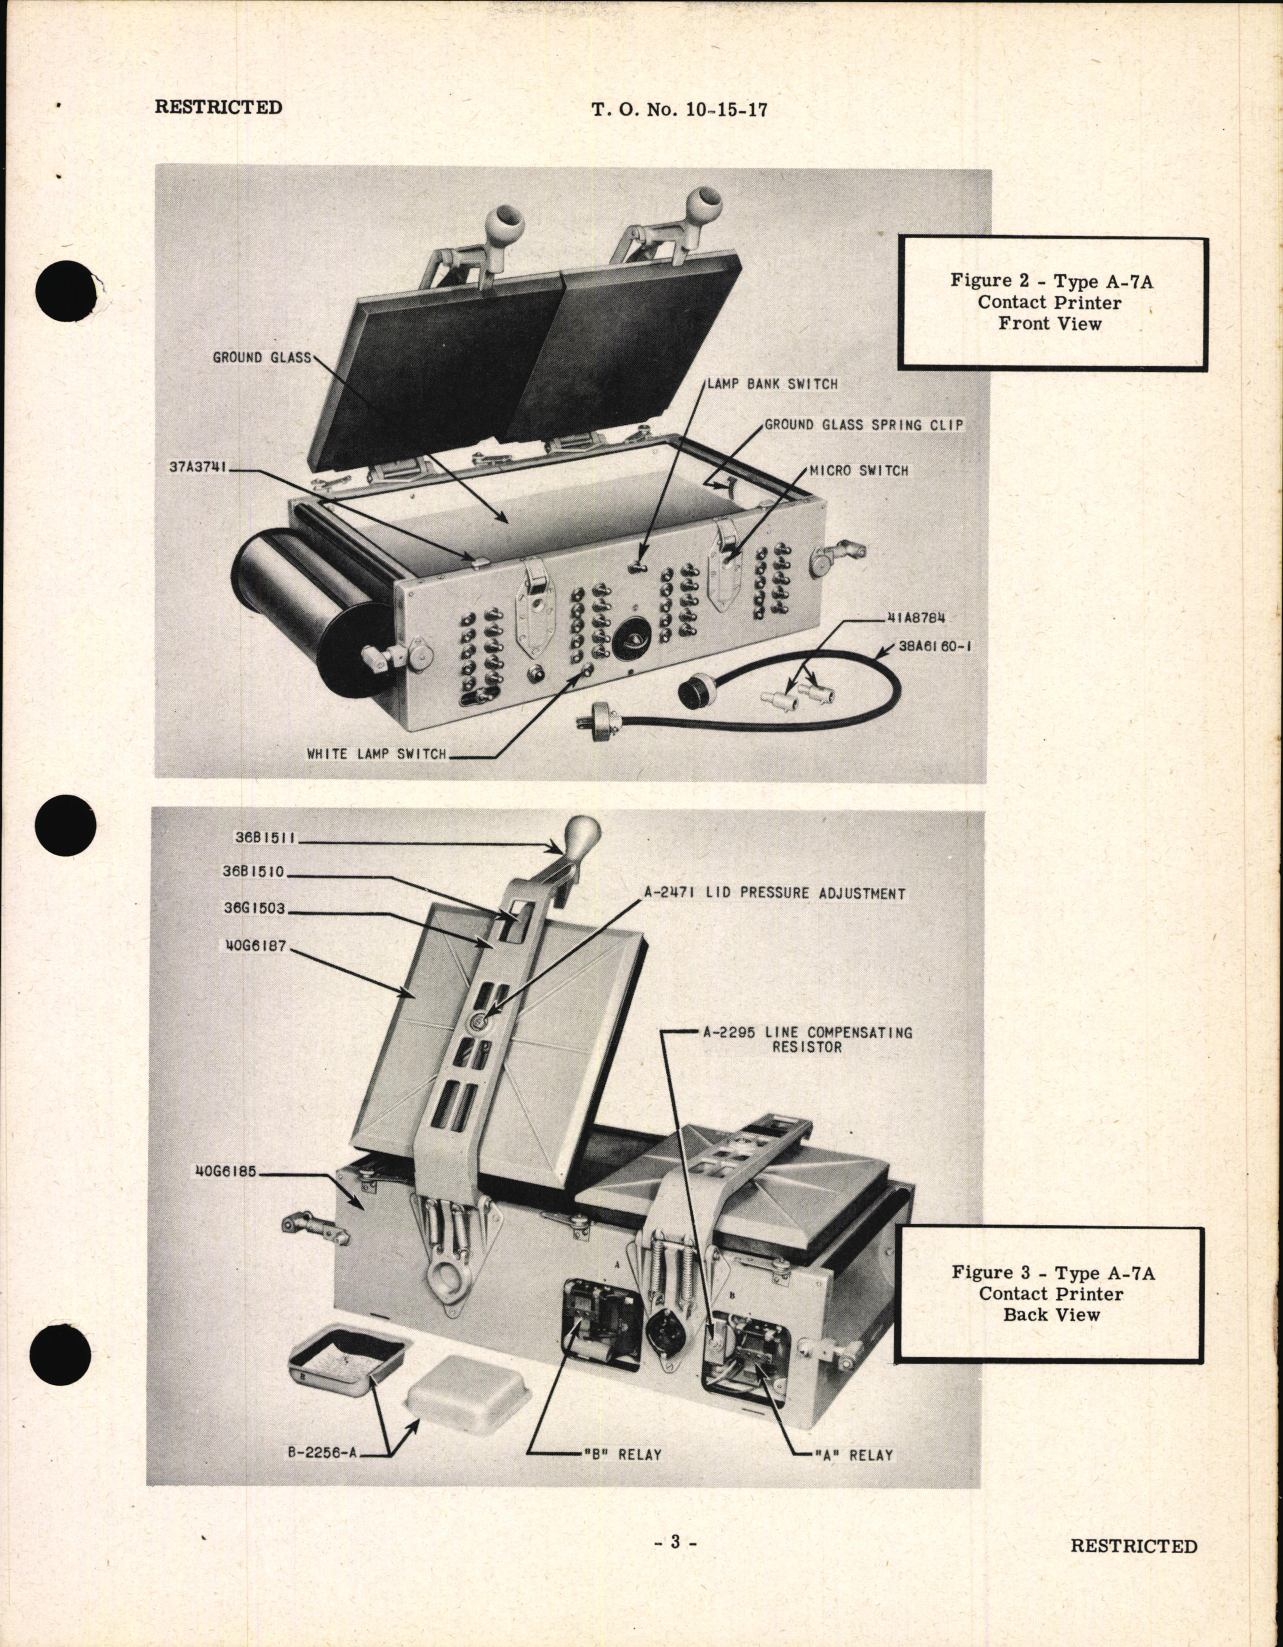 Sample page 7 from AirCorps Library document: Handbook of Instructions with Parts Catalog for Type A-7A Contact Printer